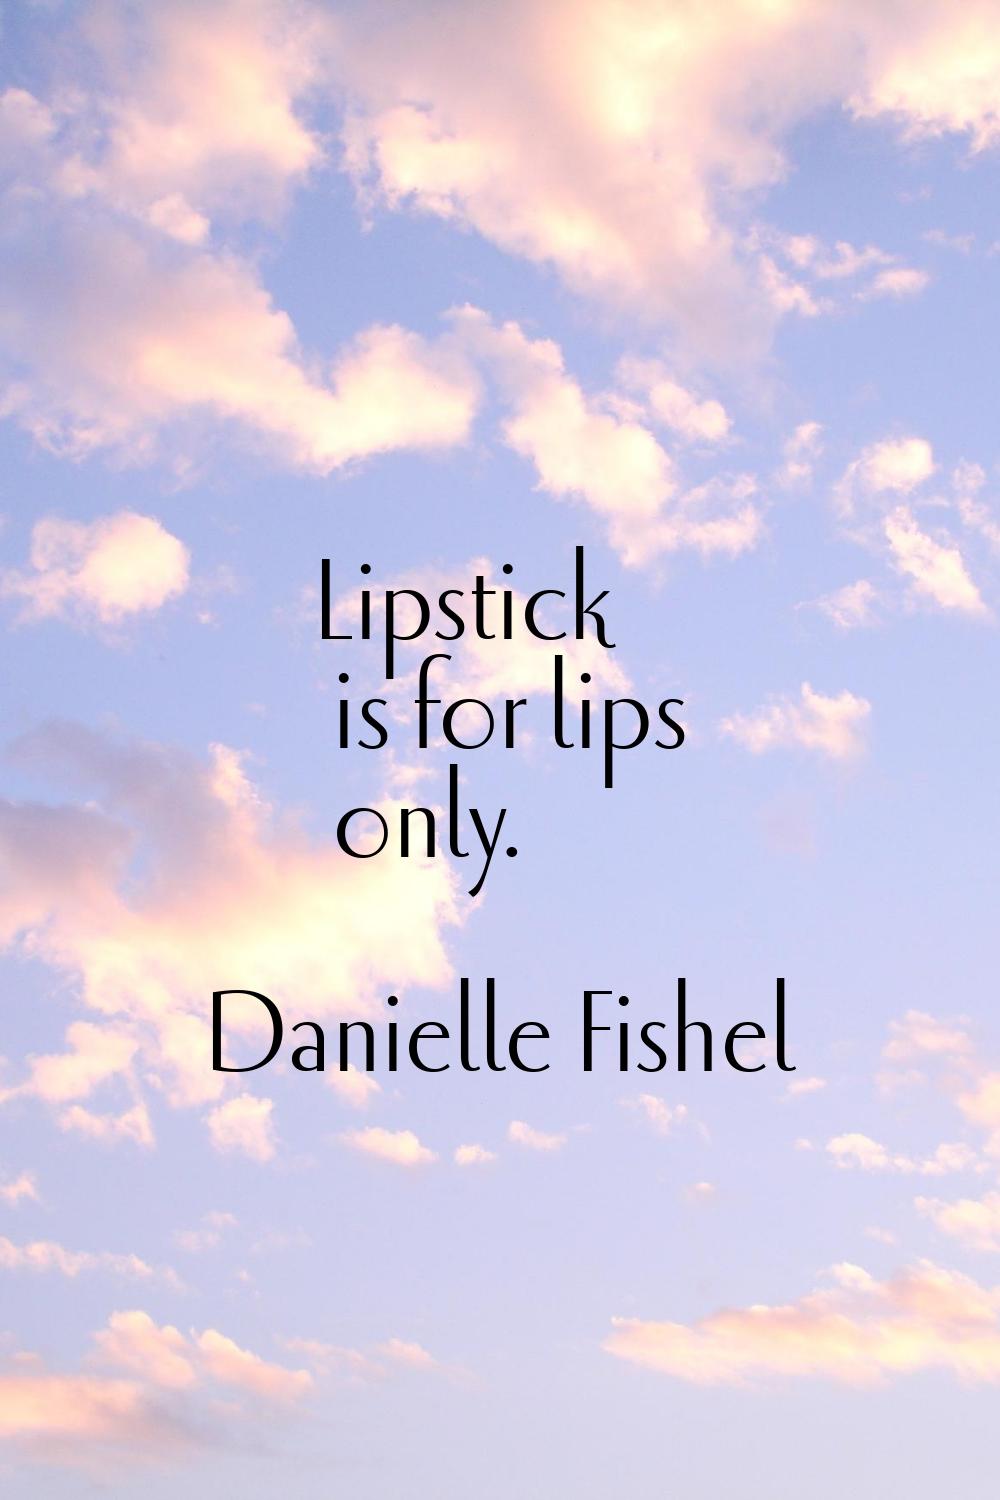 Lipstick is for lips only.